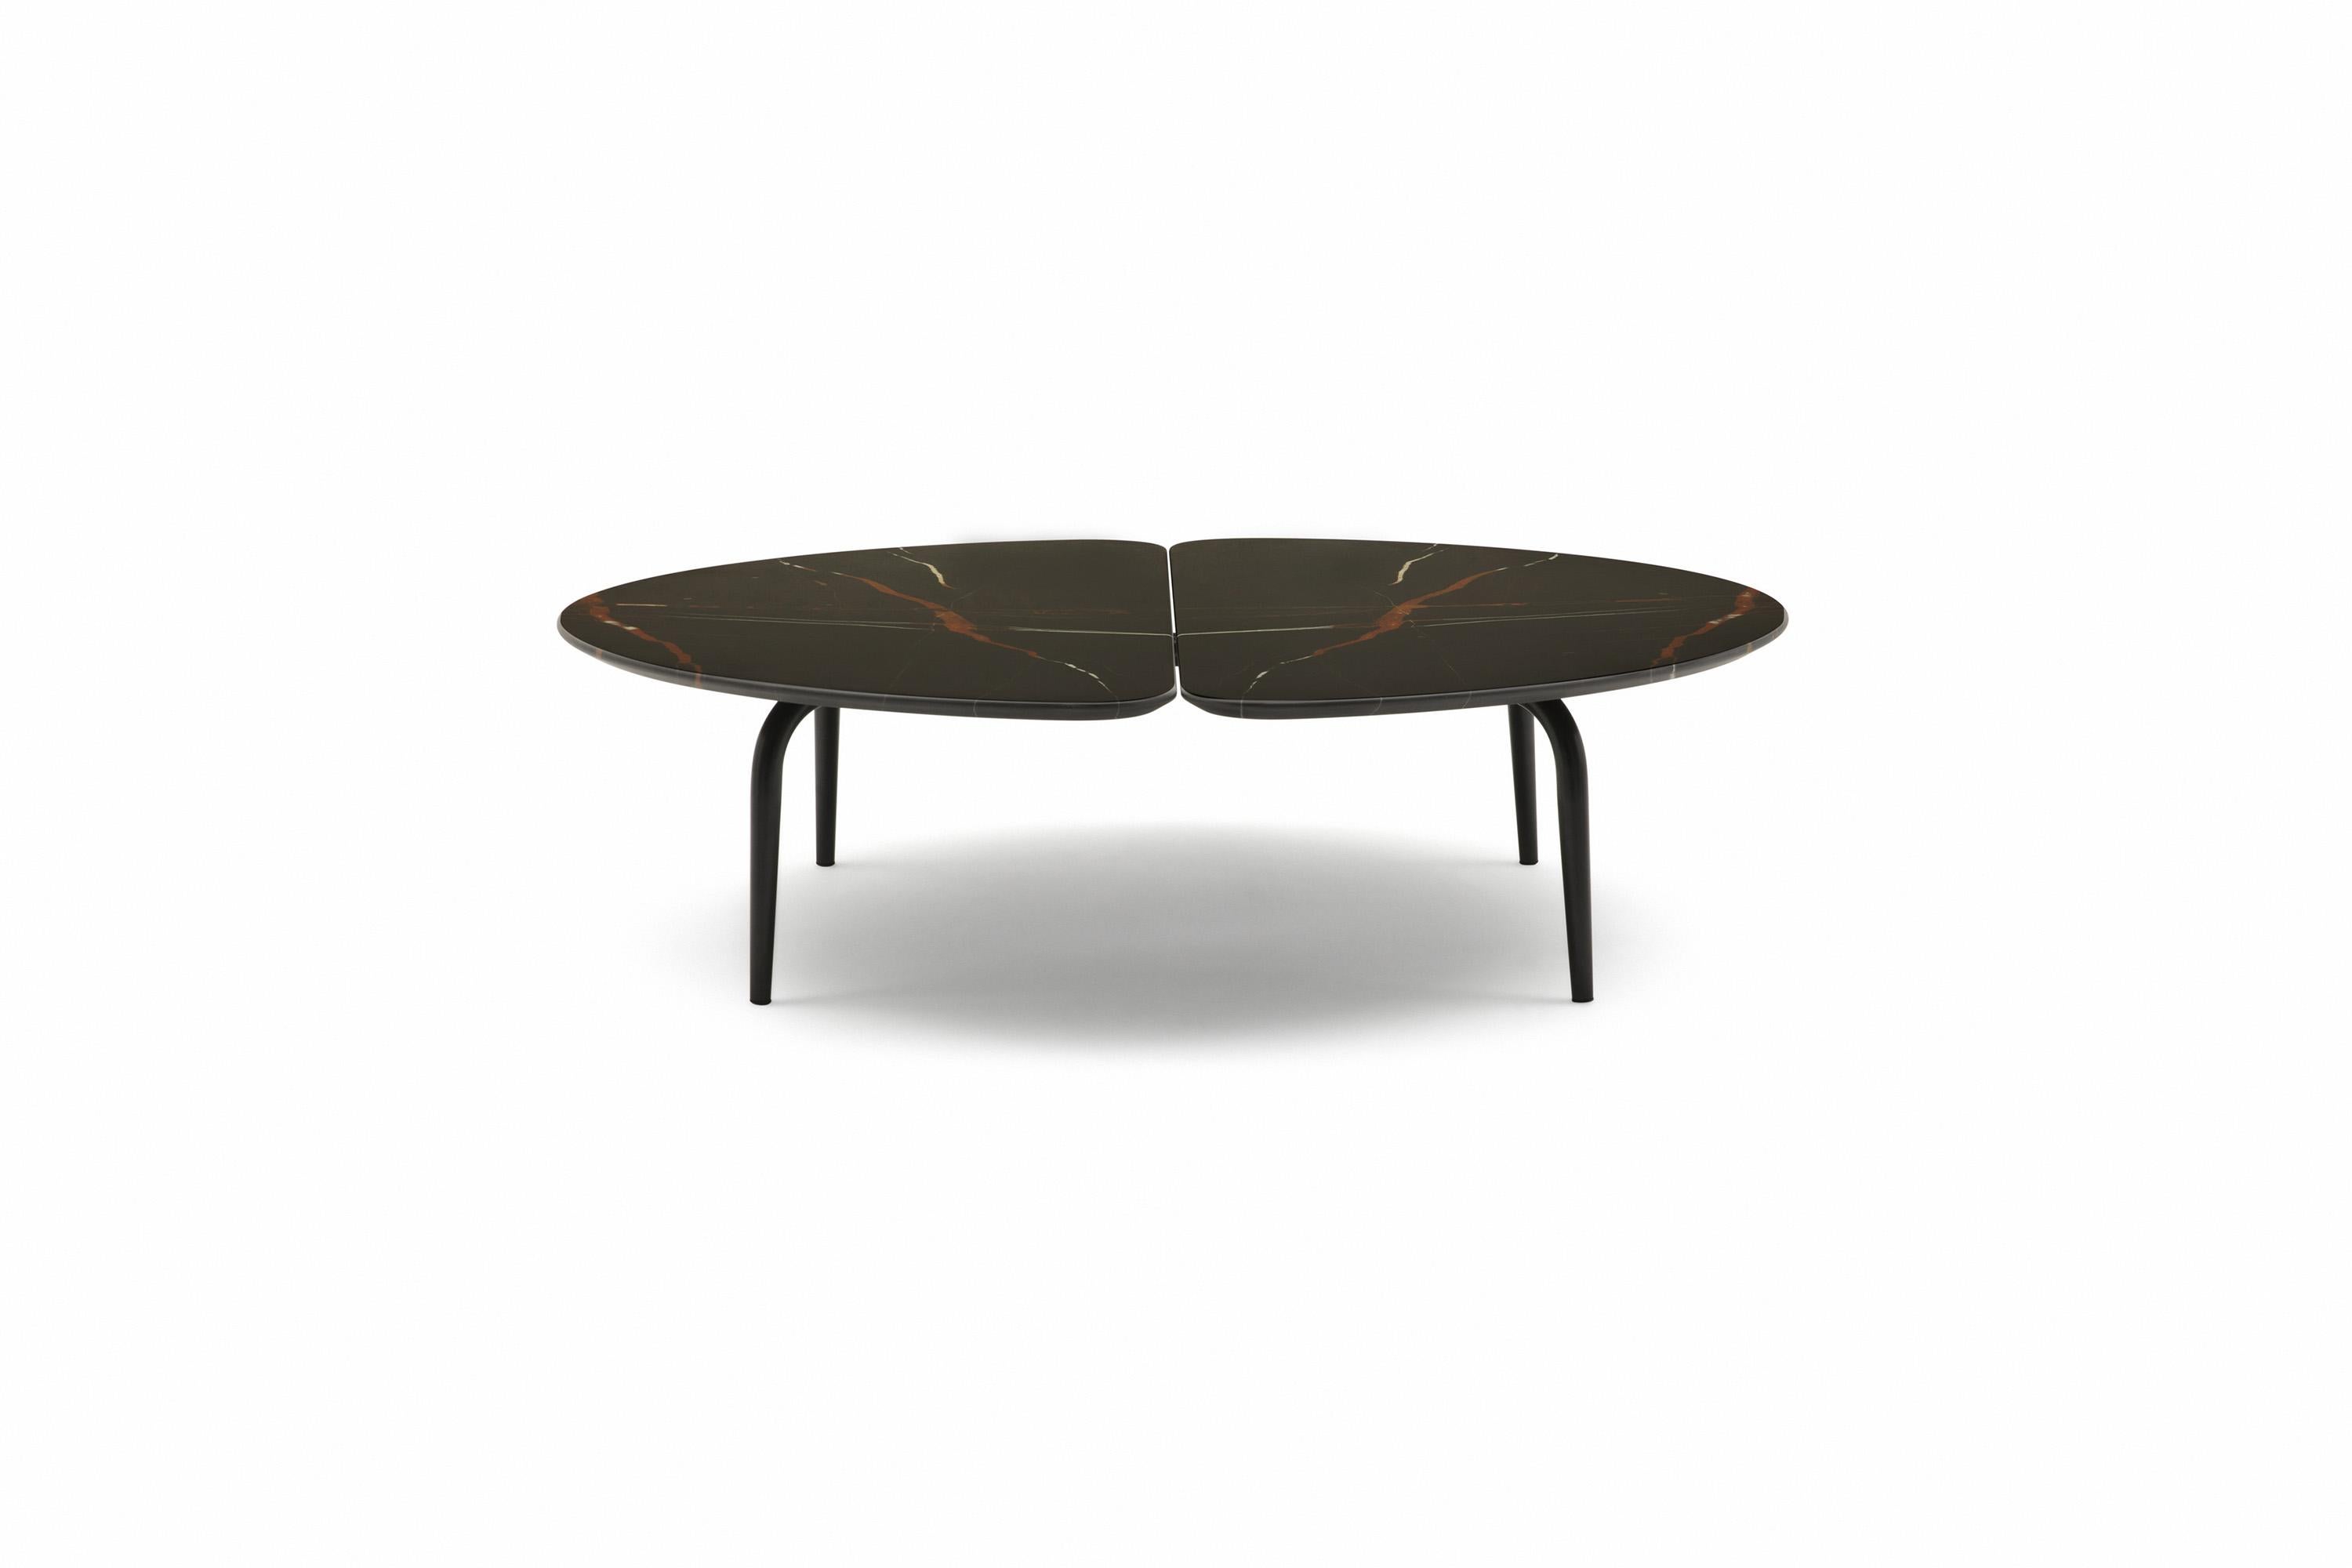 Small tables. Black varnished steel frame. Tops available either in grey Calacatta marble, in red Lepanto marble or in Sahara Noir marble with stain-resistant protective varnish, in clear matt polyester.
Two coffee tables inspired by two concepts